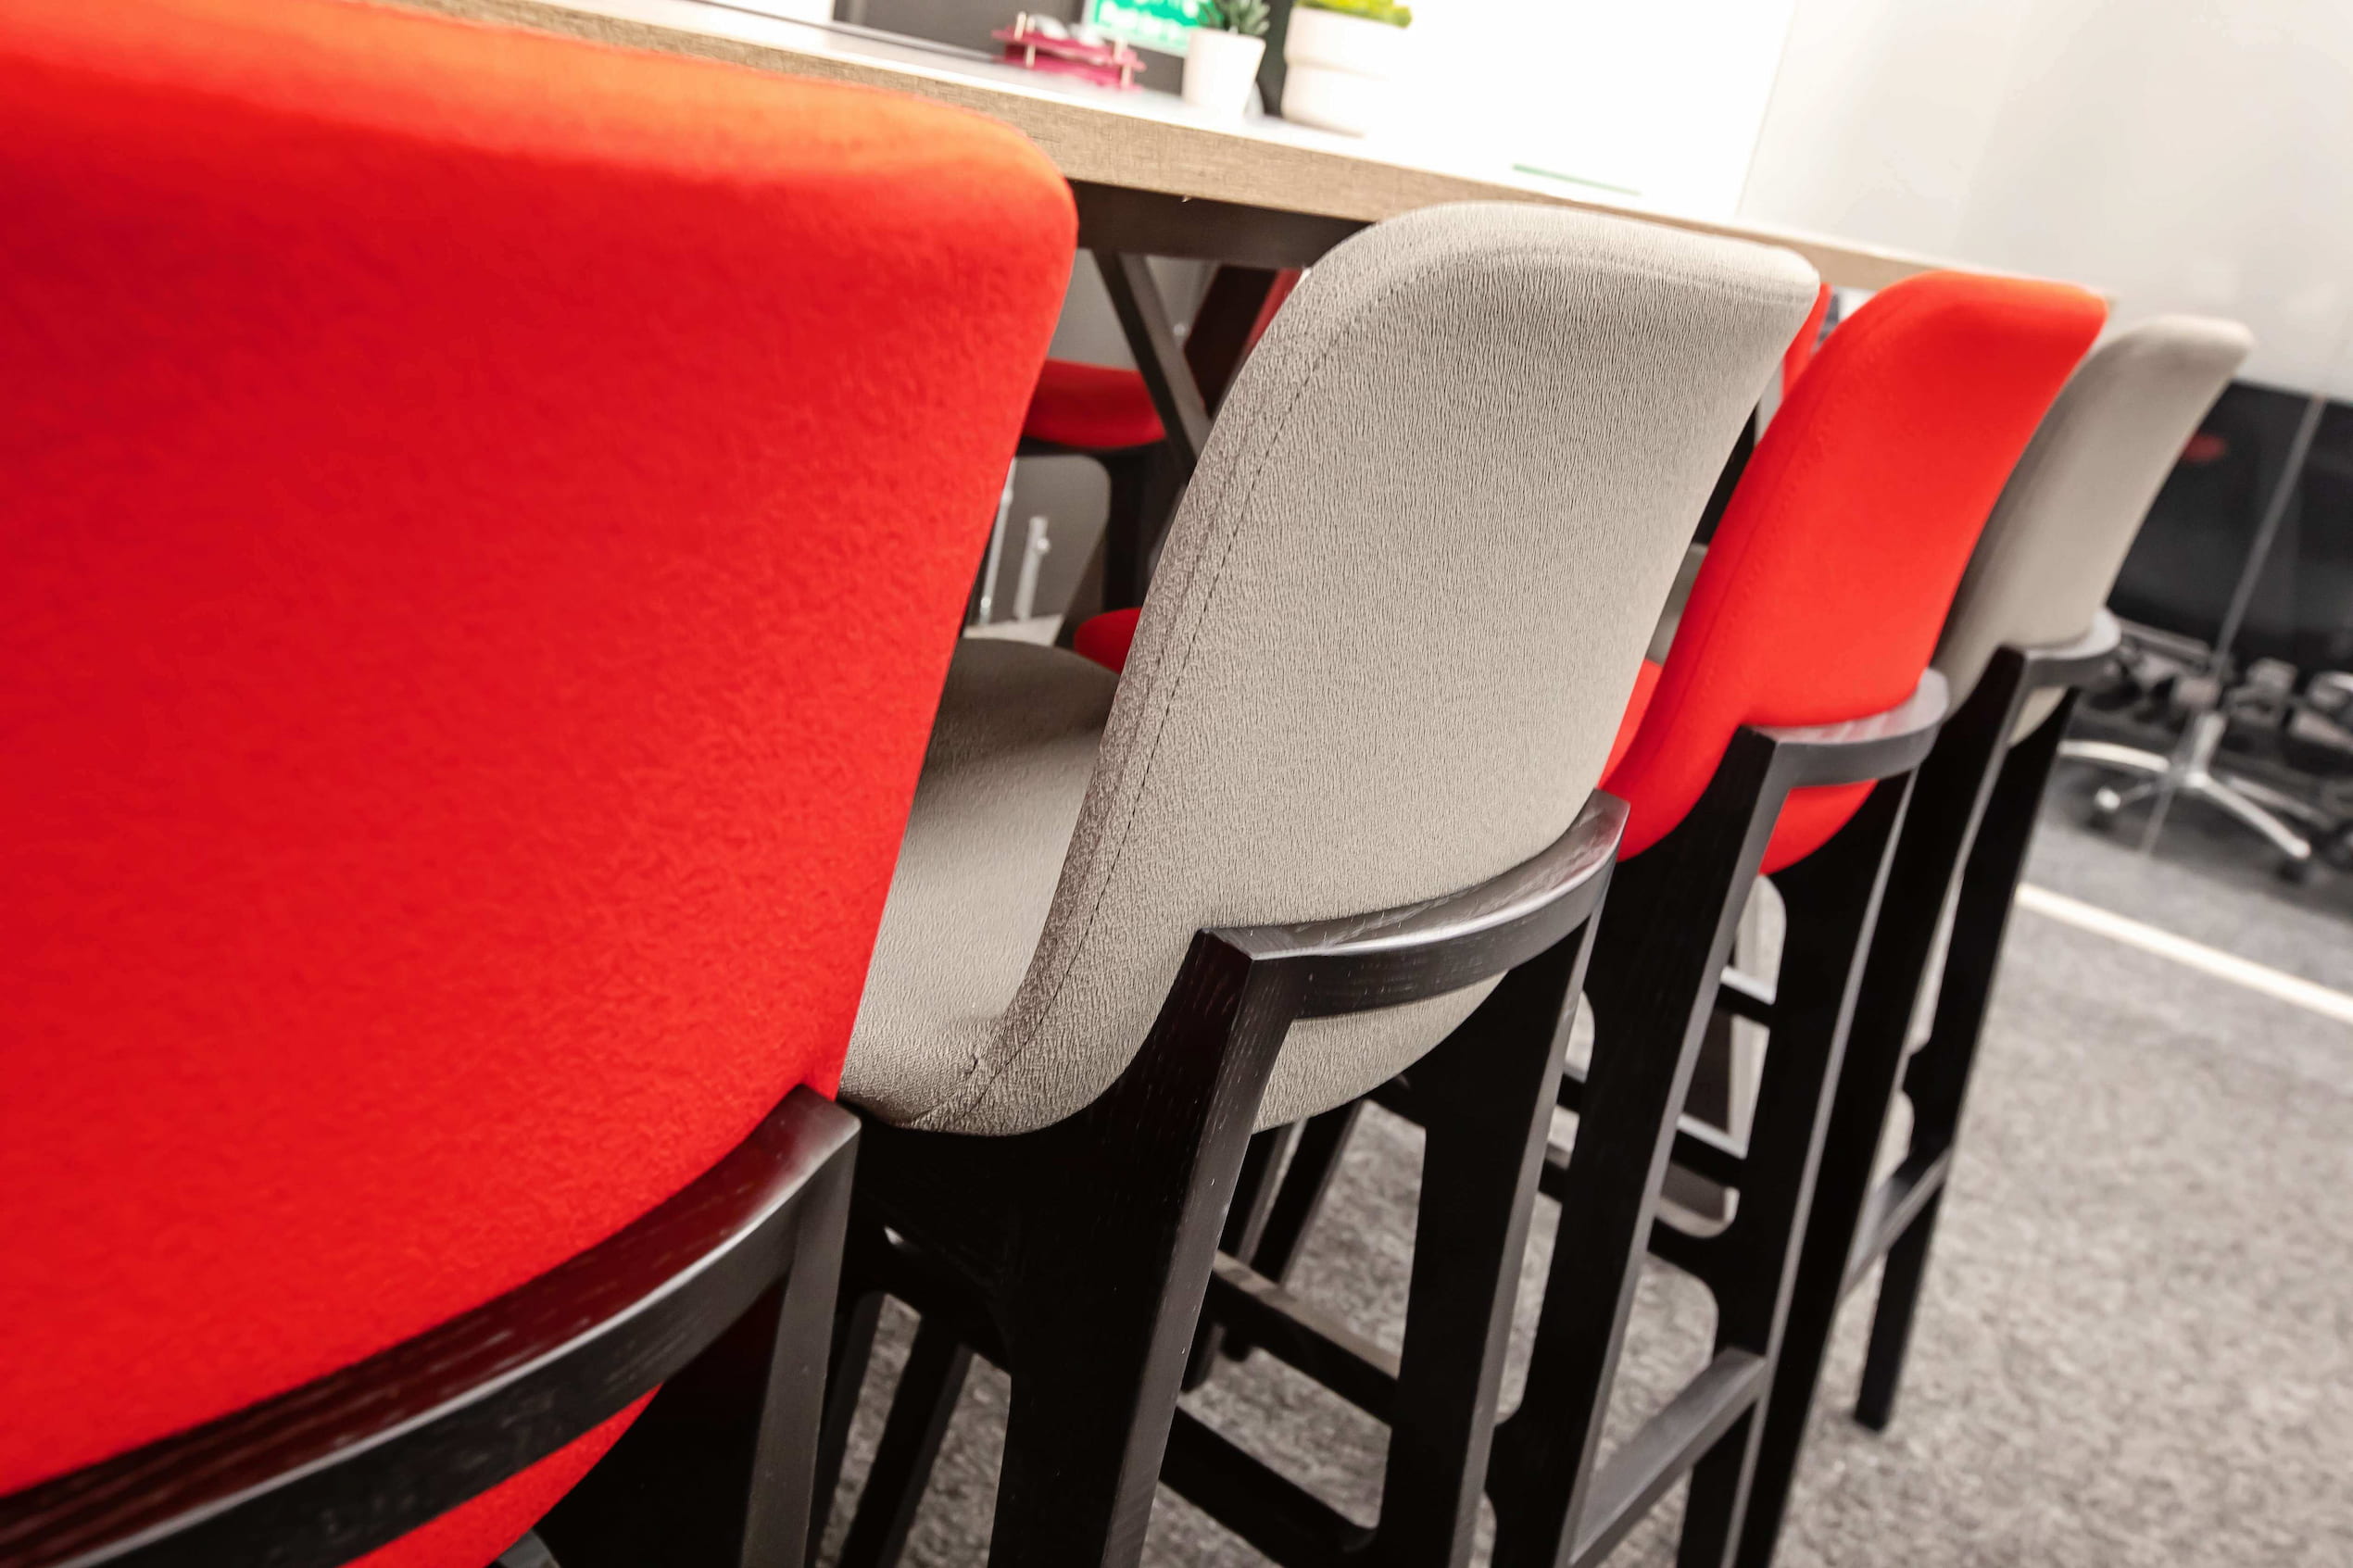 The back of red and grey alternating stools.